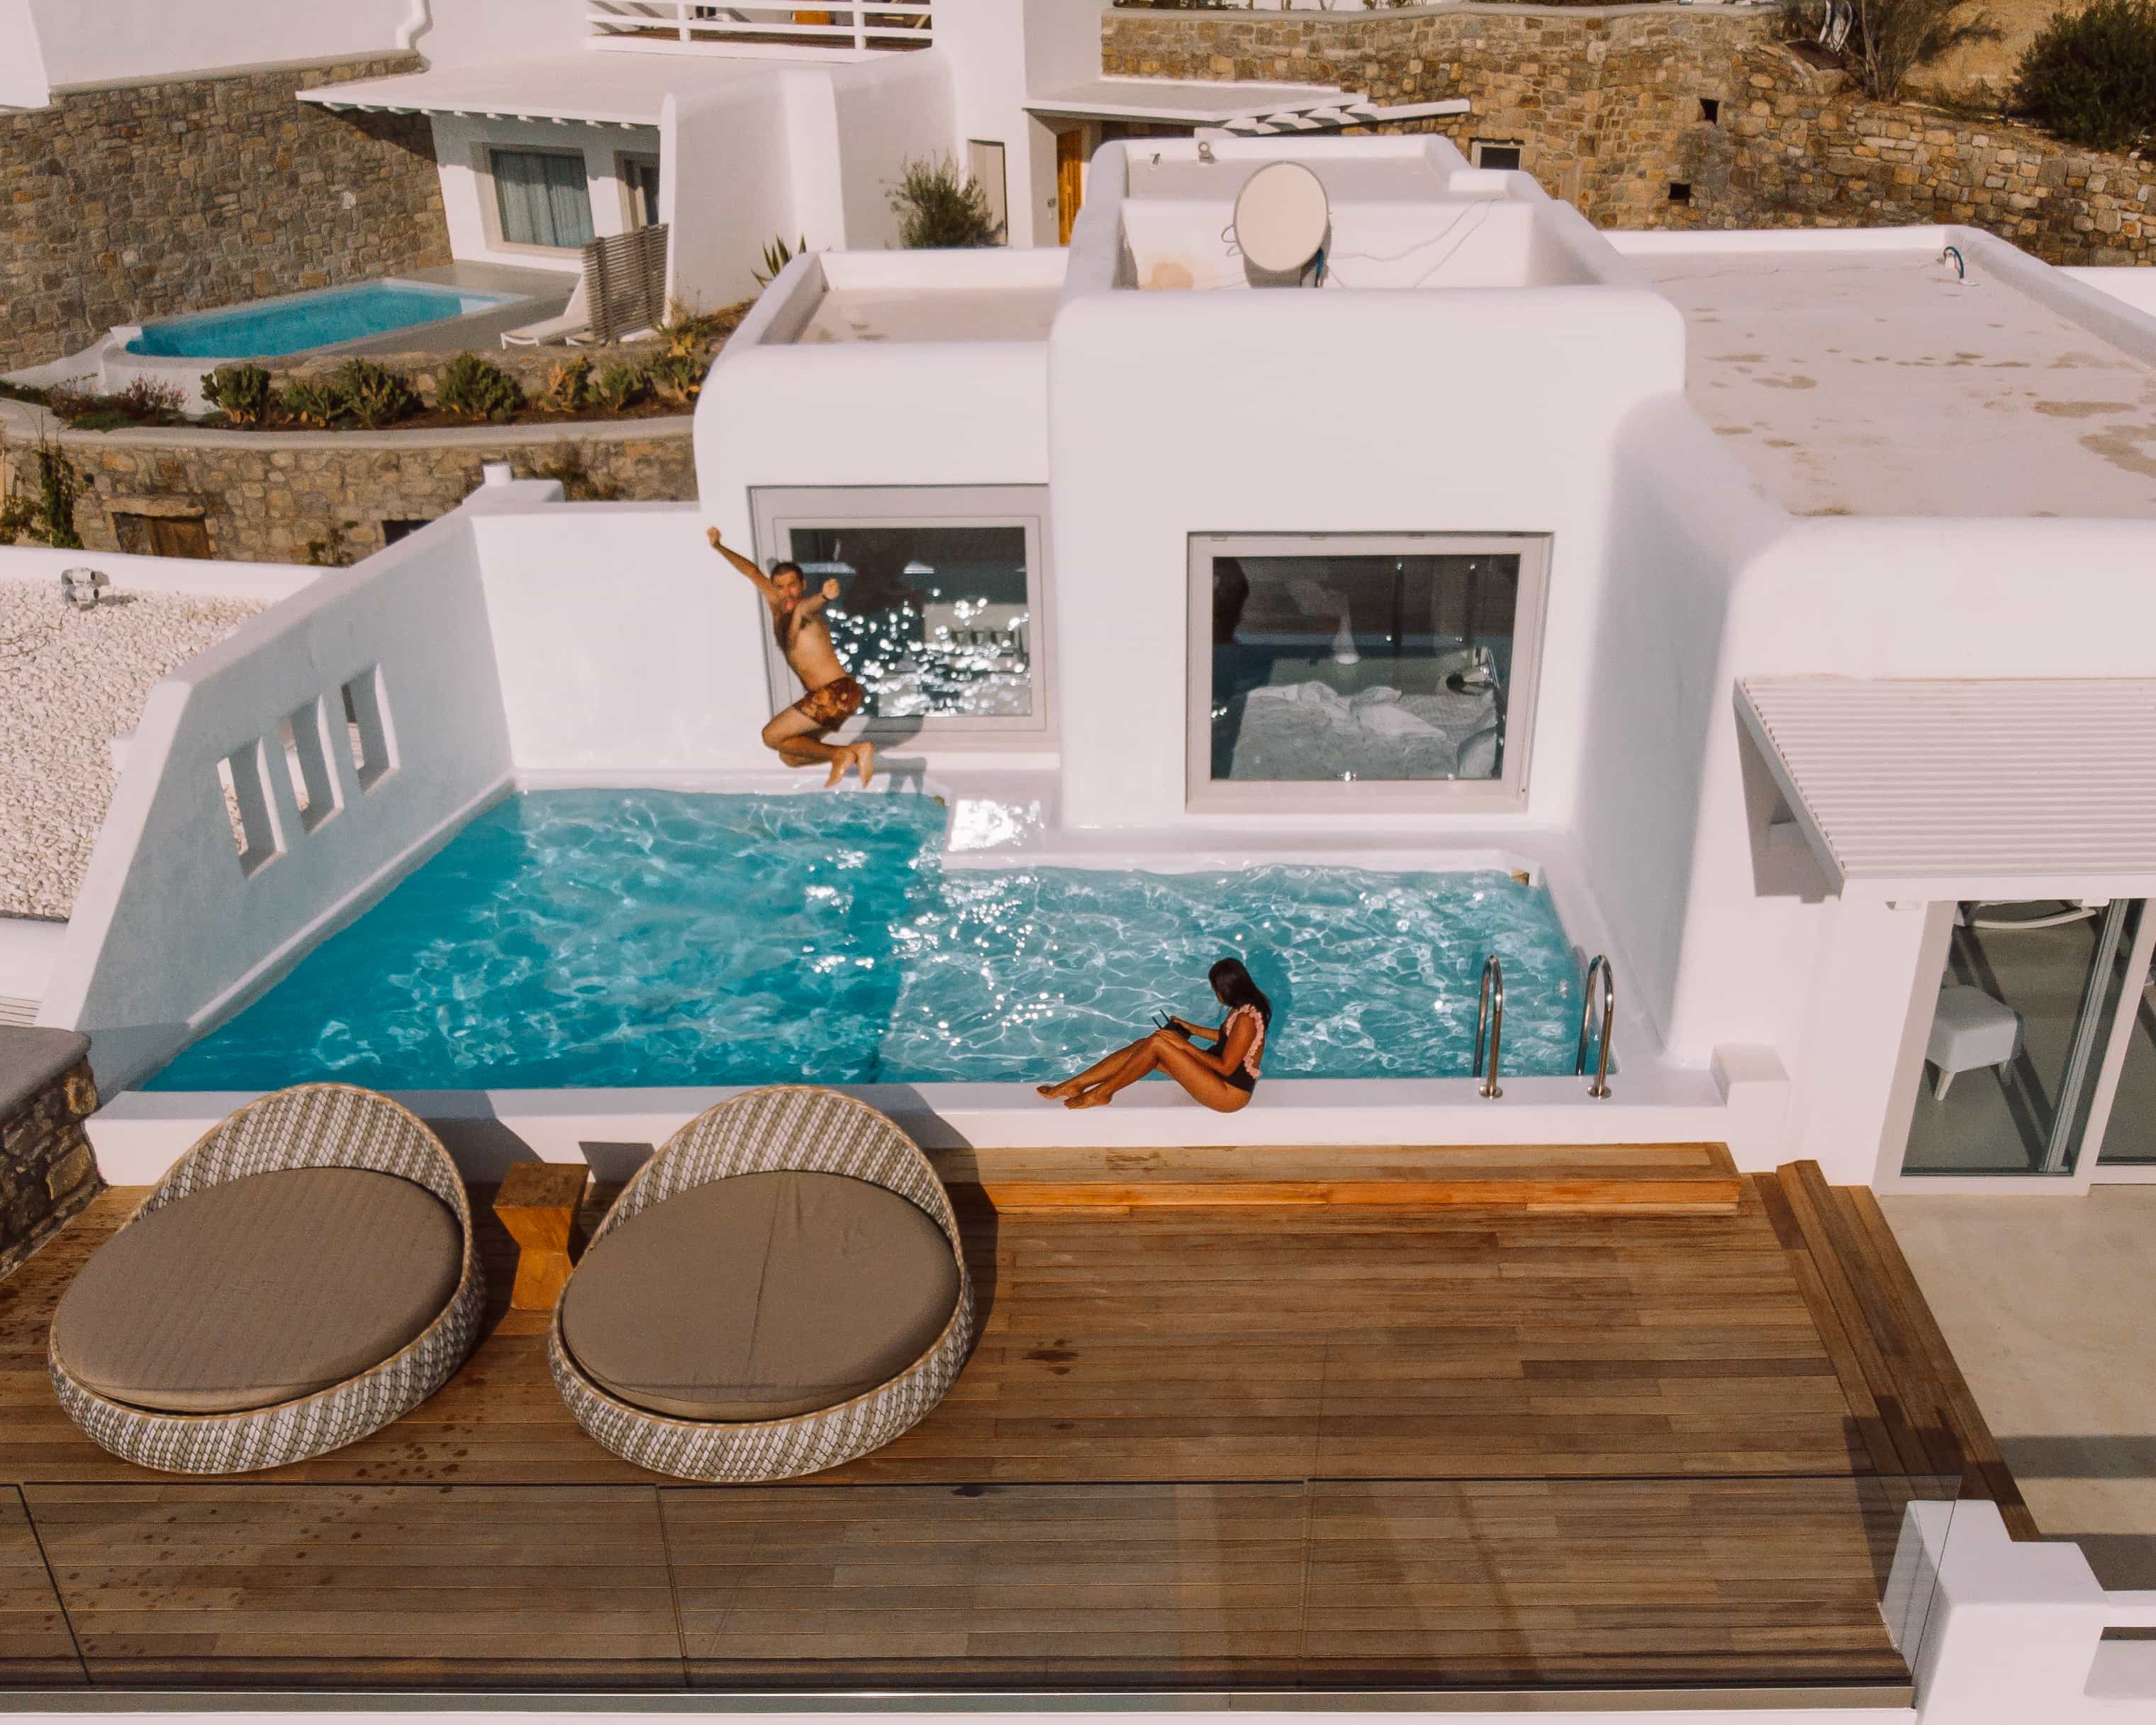 Things to do in Mykonos, Places to visit in Mykonos, Food to try in Mykonos, cavo tagoo mykonos